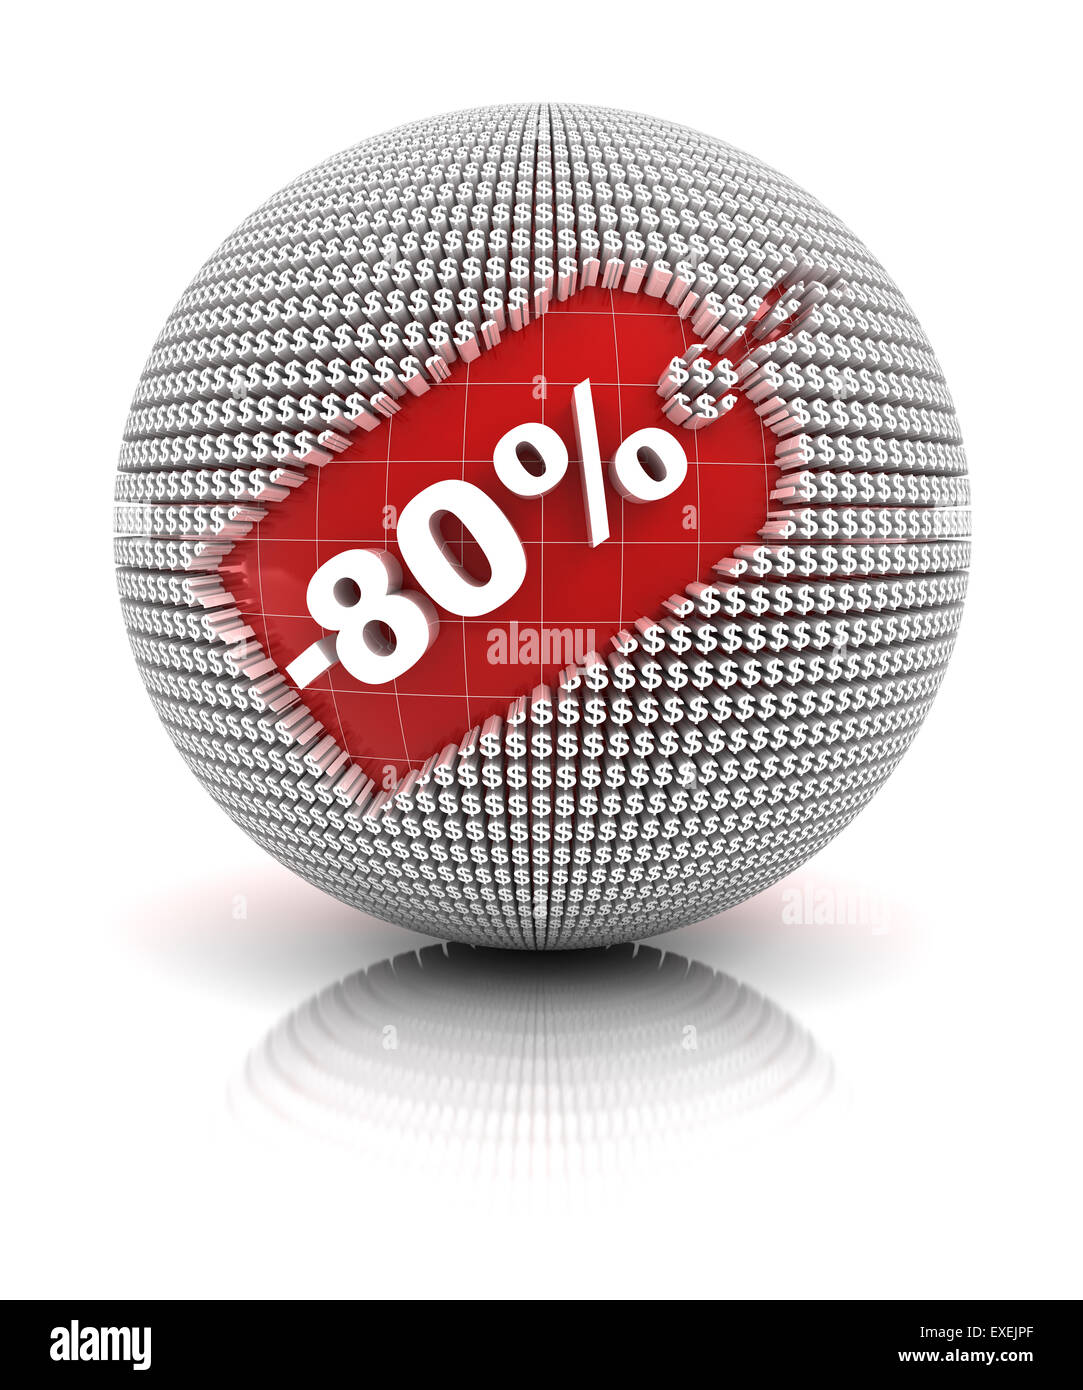 80 percent off sale tag on a sphere Stock Photo